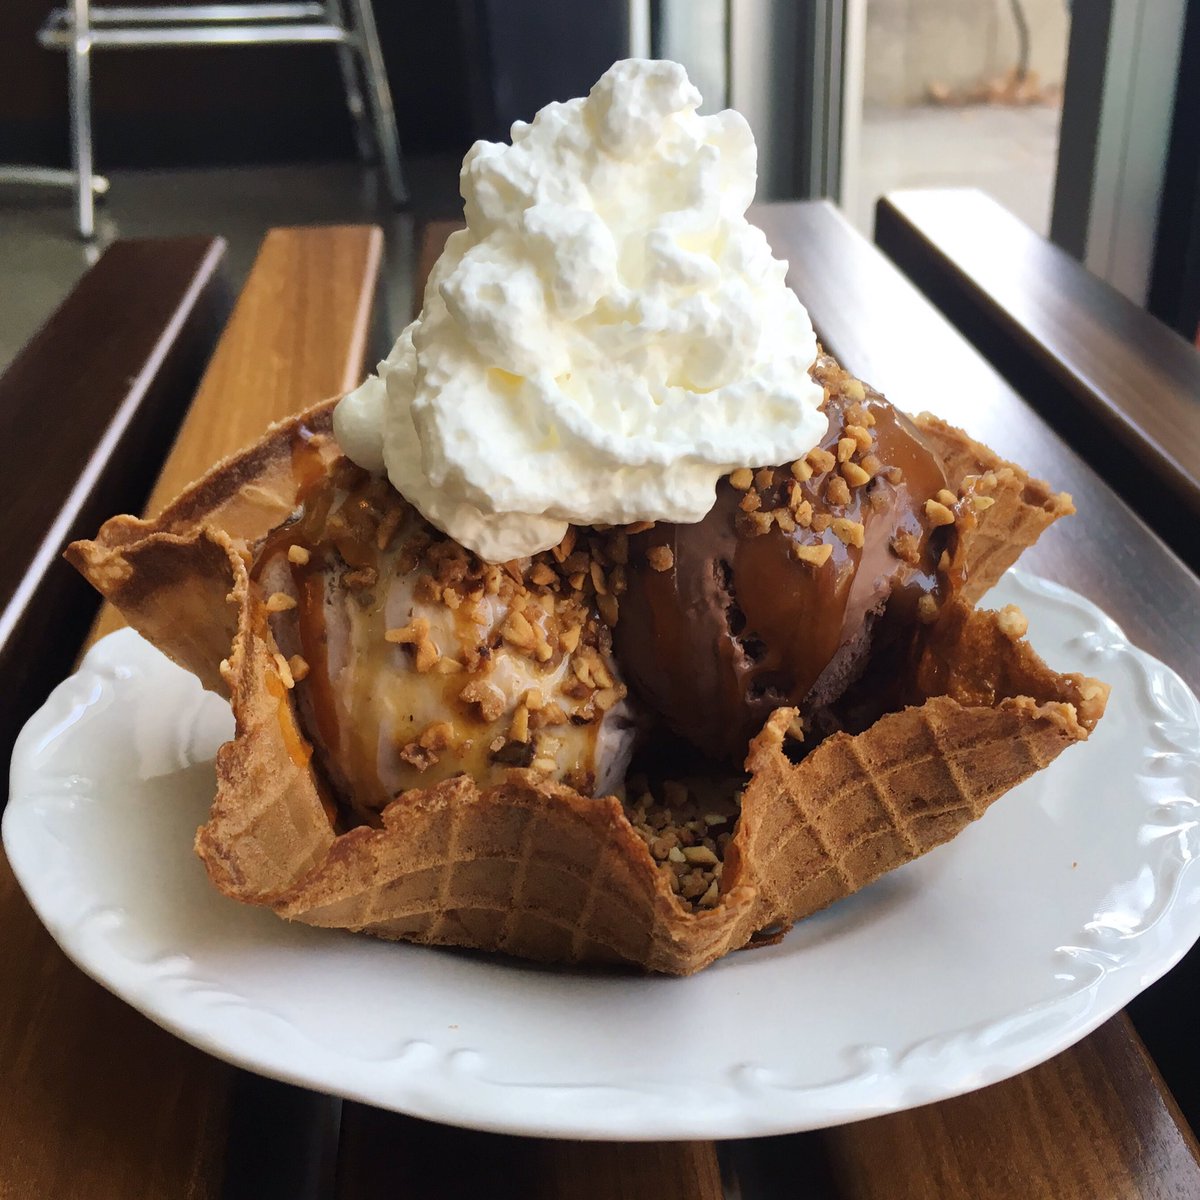 Glacé Ice Cream on X: Try our new special, the Waffle Bowl Sundae